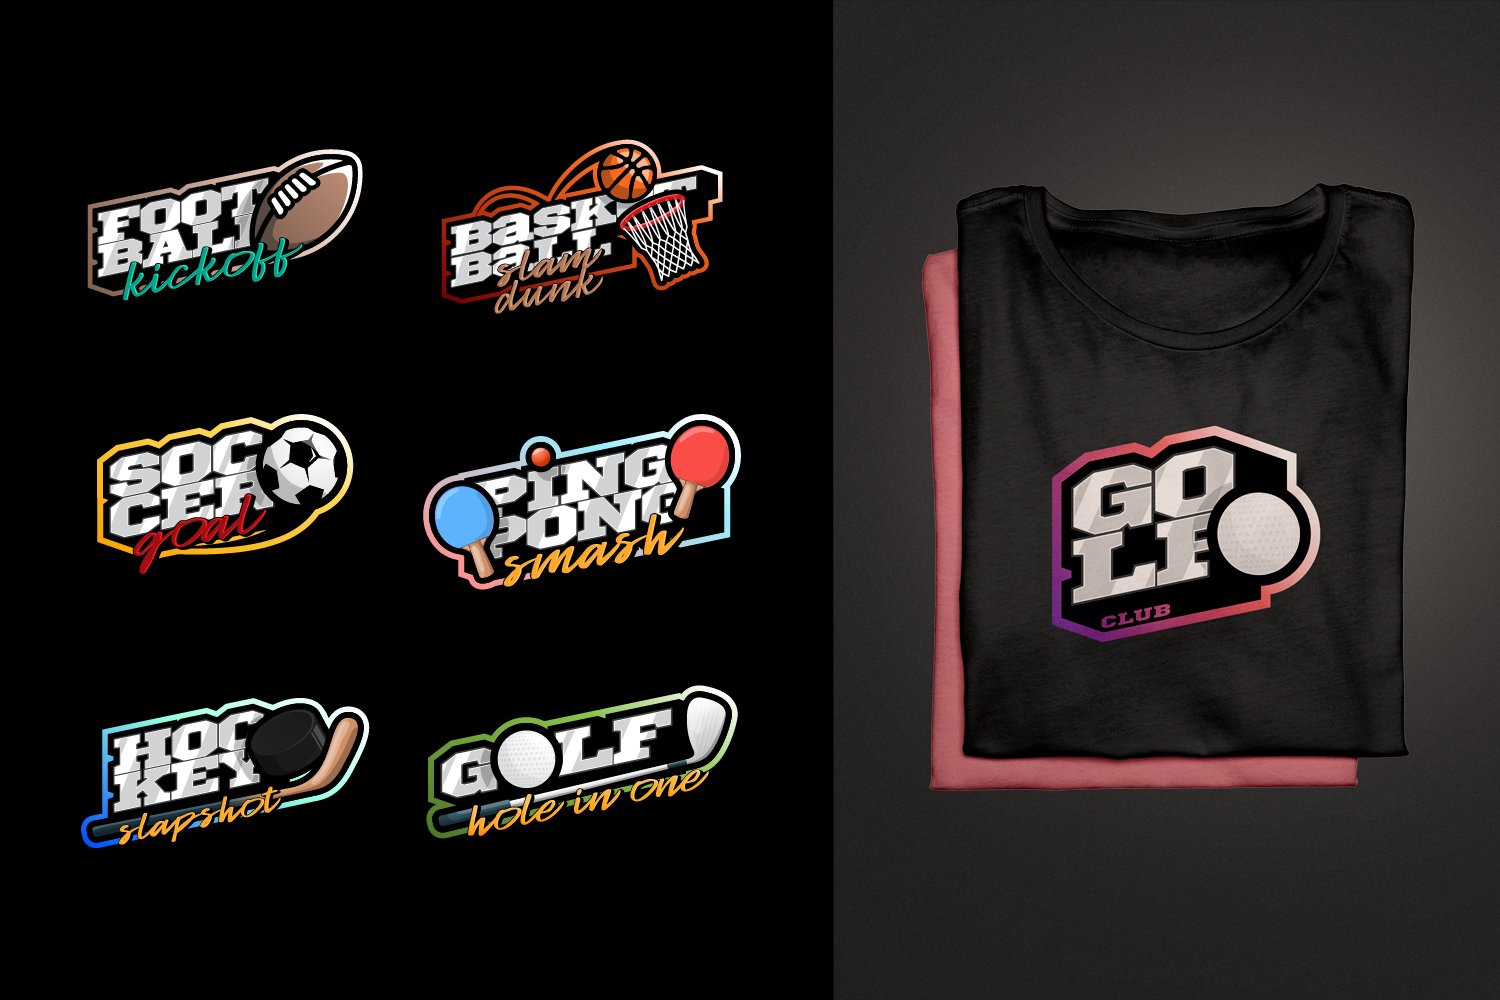 High quality sports logos in different colors that look stylish on clothes.